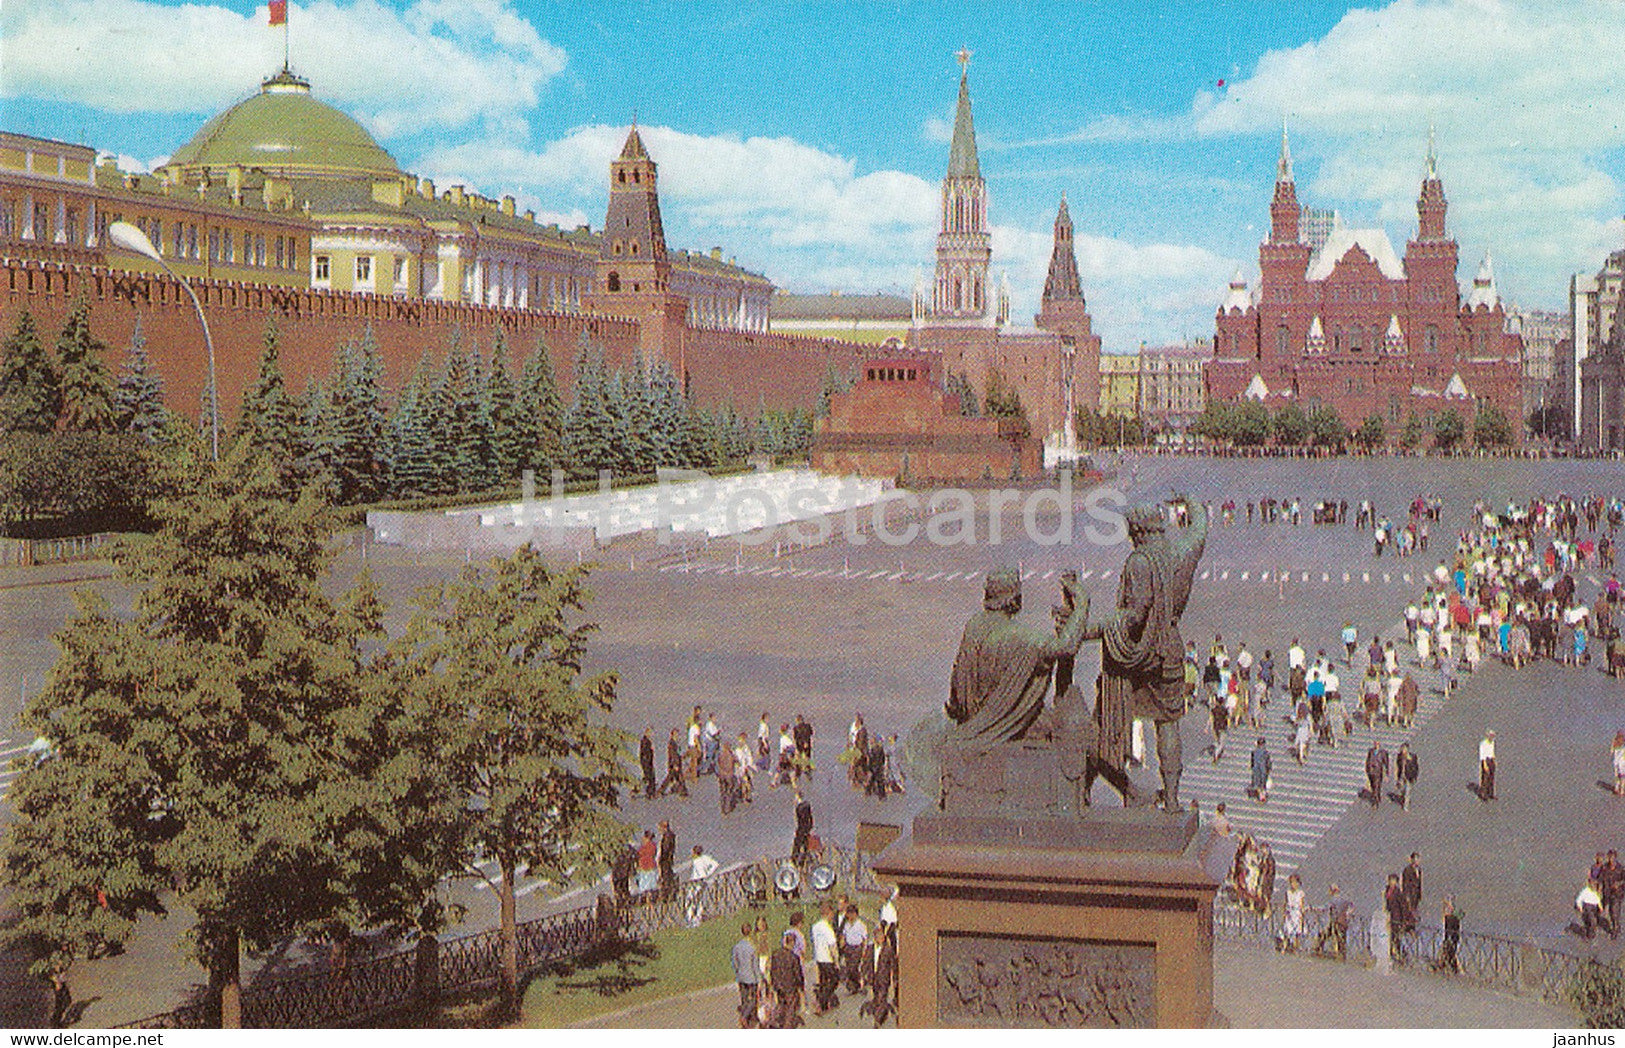 Moscow - Red Square - 1974 - Russia USSR - unused - JH Postcards